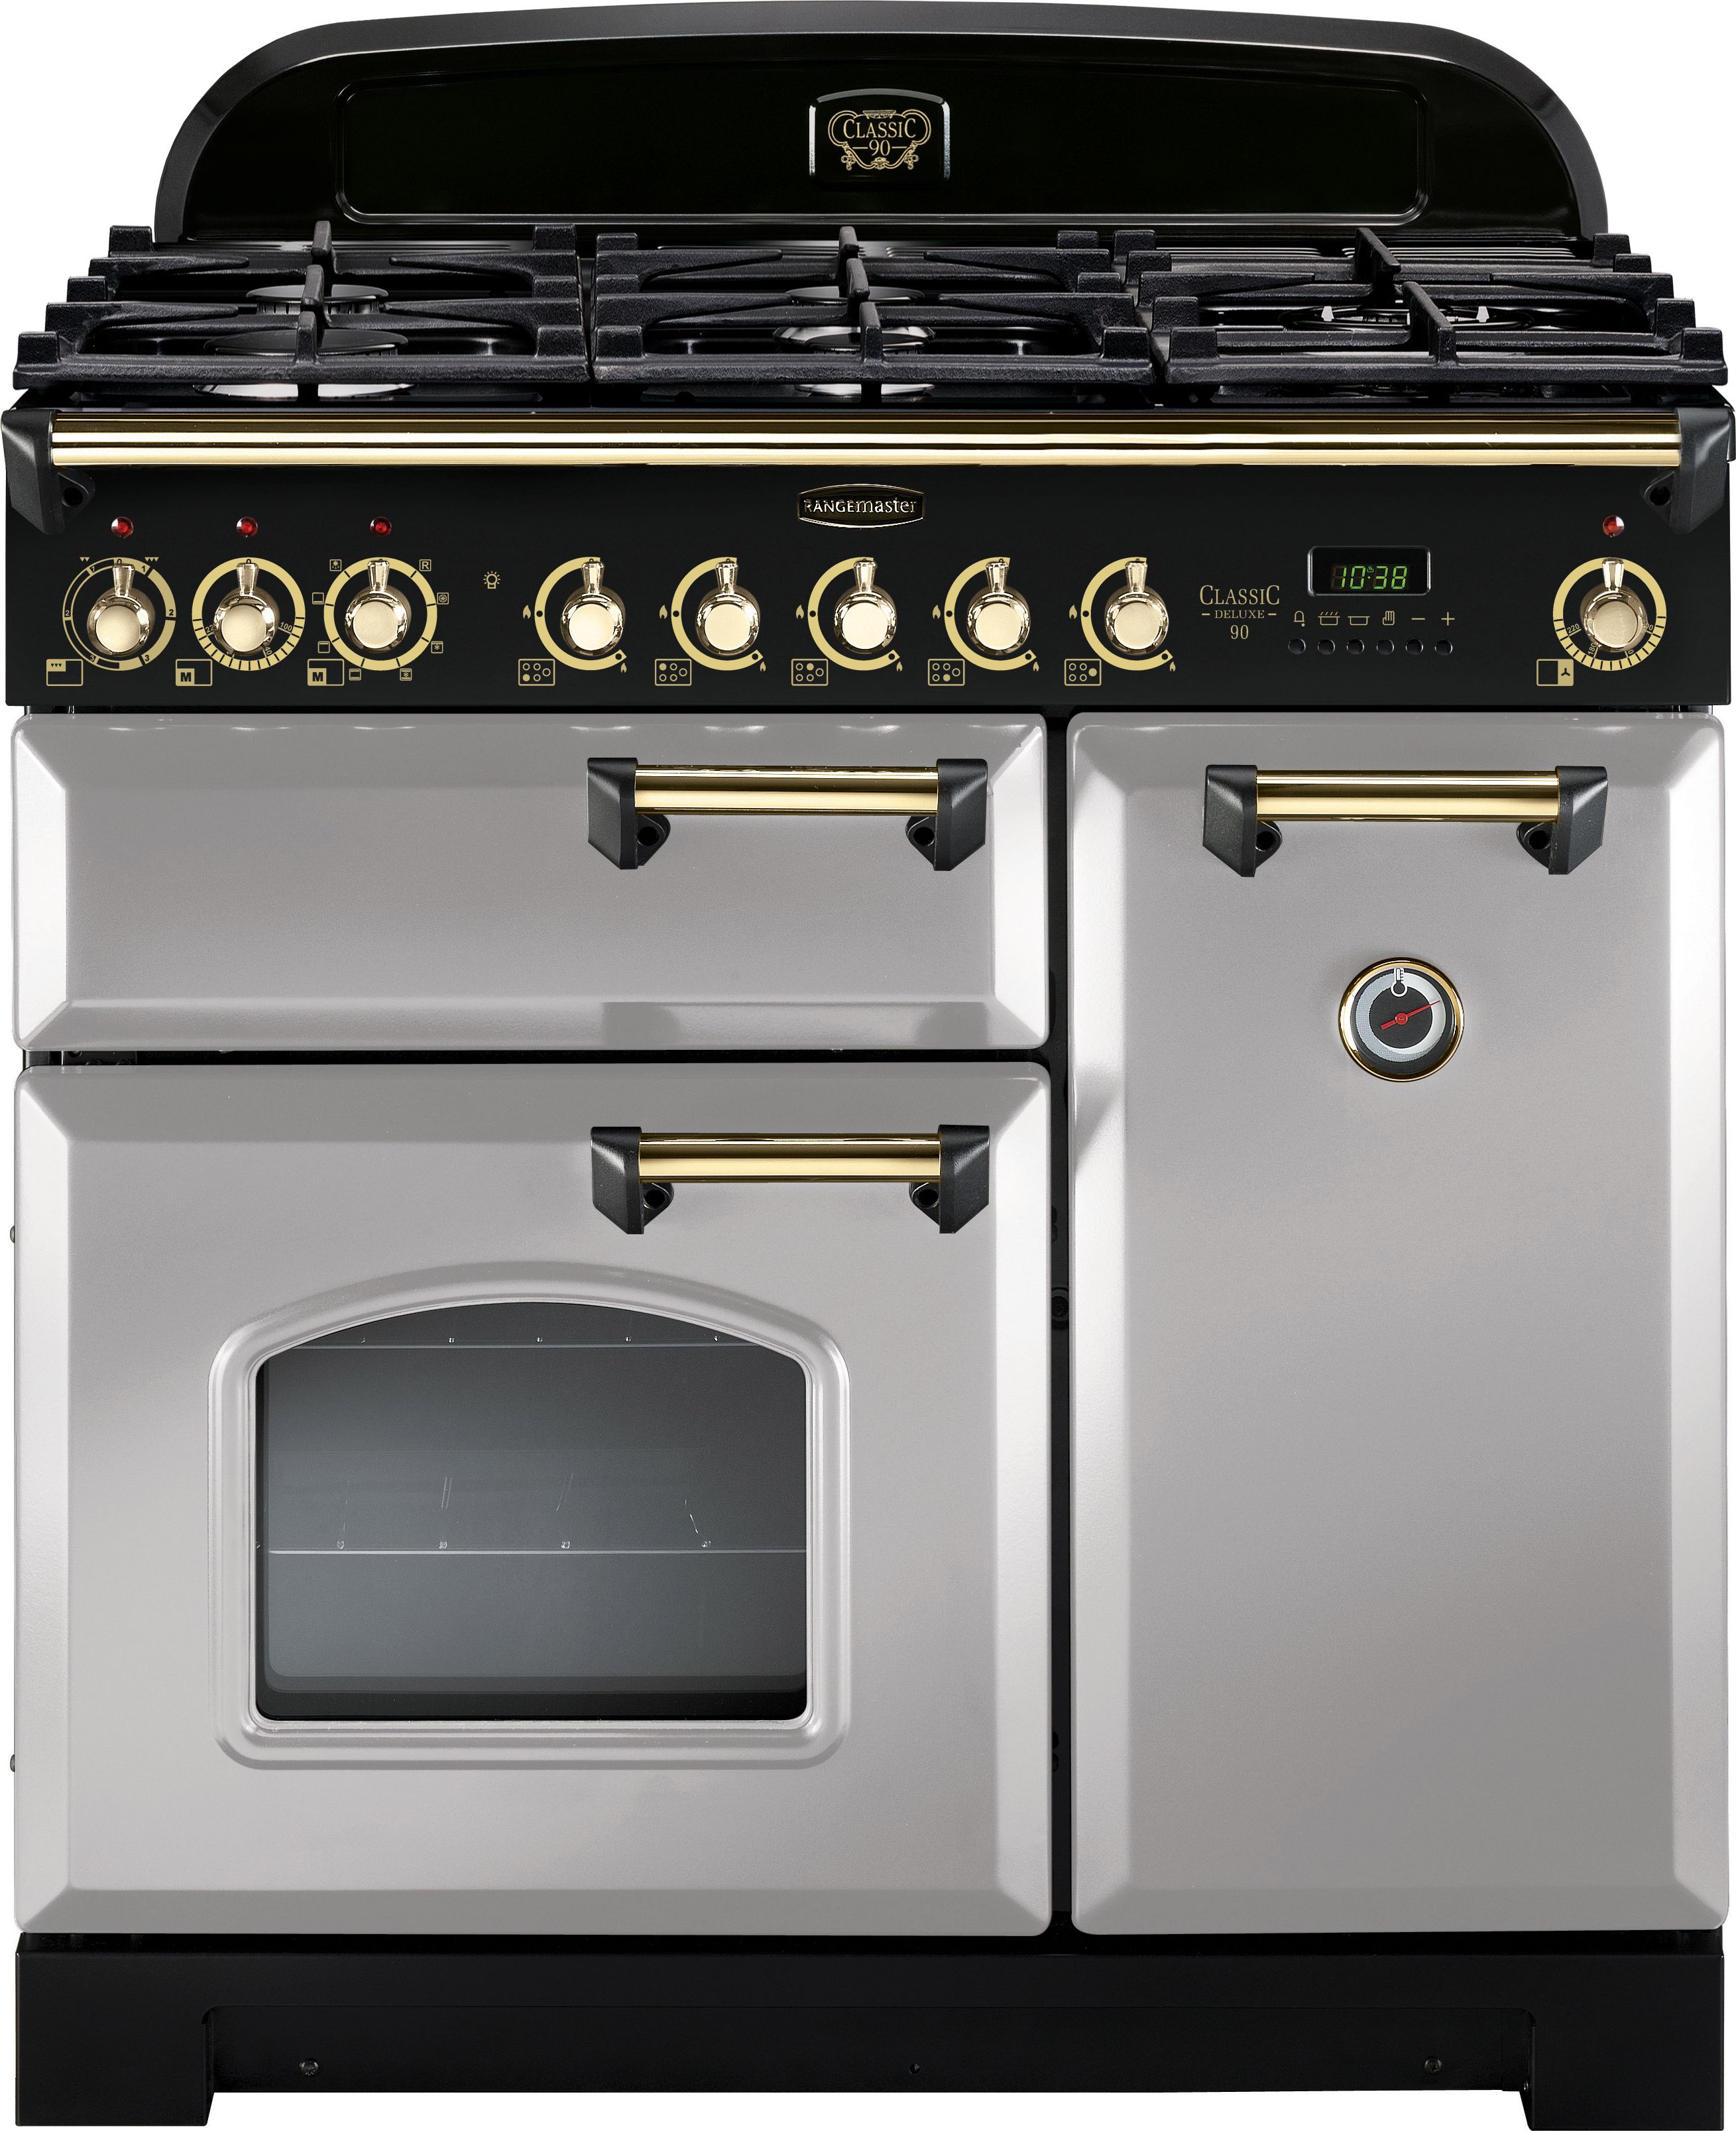 Rangemaster Classic Deluxe CDL90DFFRP/B 90cm Dual Fuel Range Cooker - Royal Pearl / Brass - A/A Rated, Grey